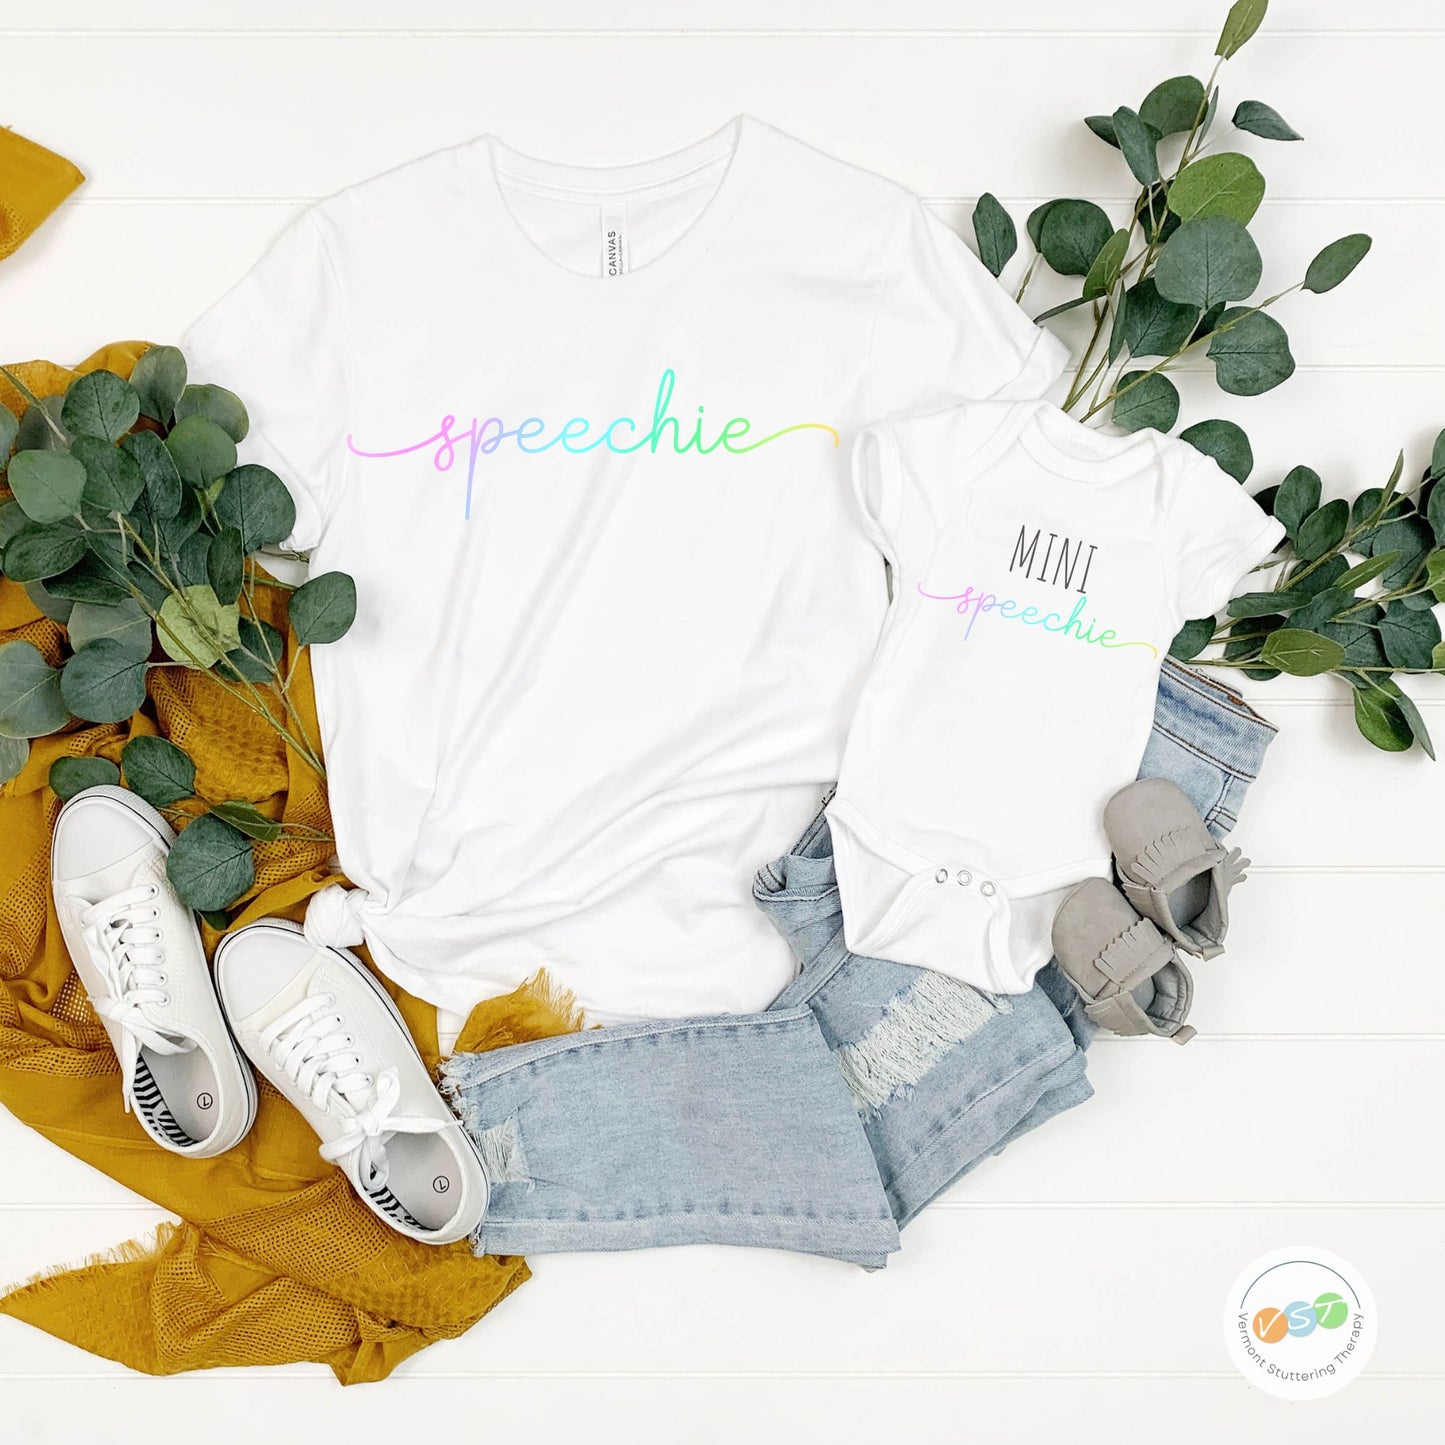 "Mini Speechie" Infant Bodysuit (see link to order matching mommy "Speechie" T-shirt separately)